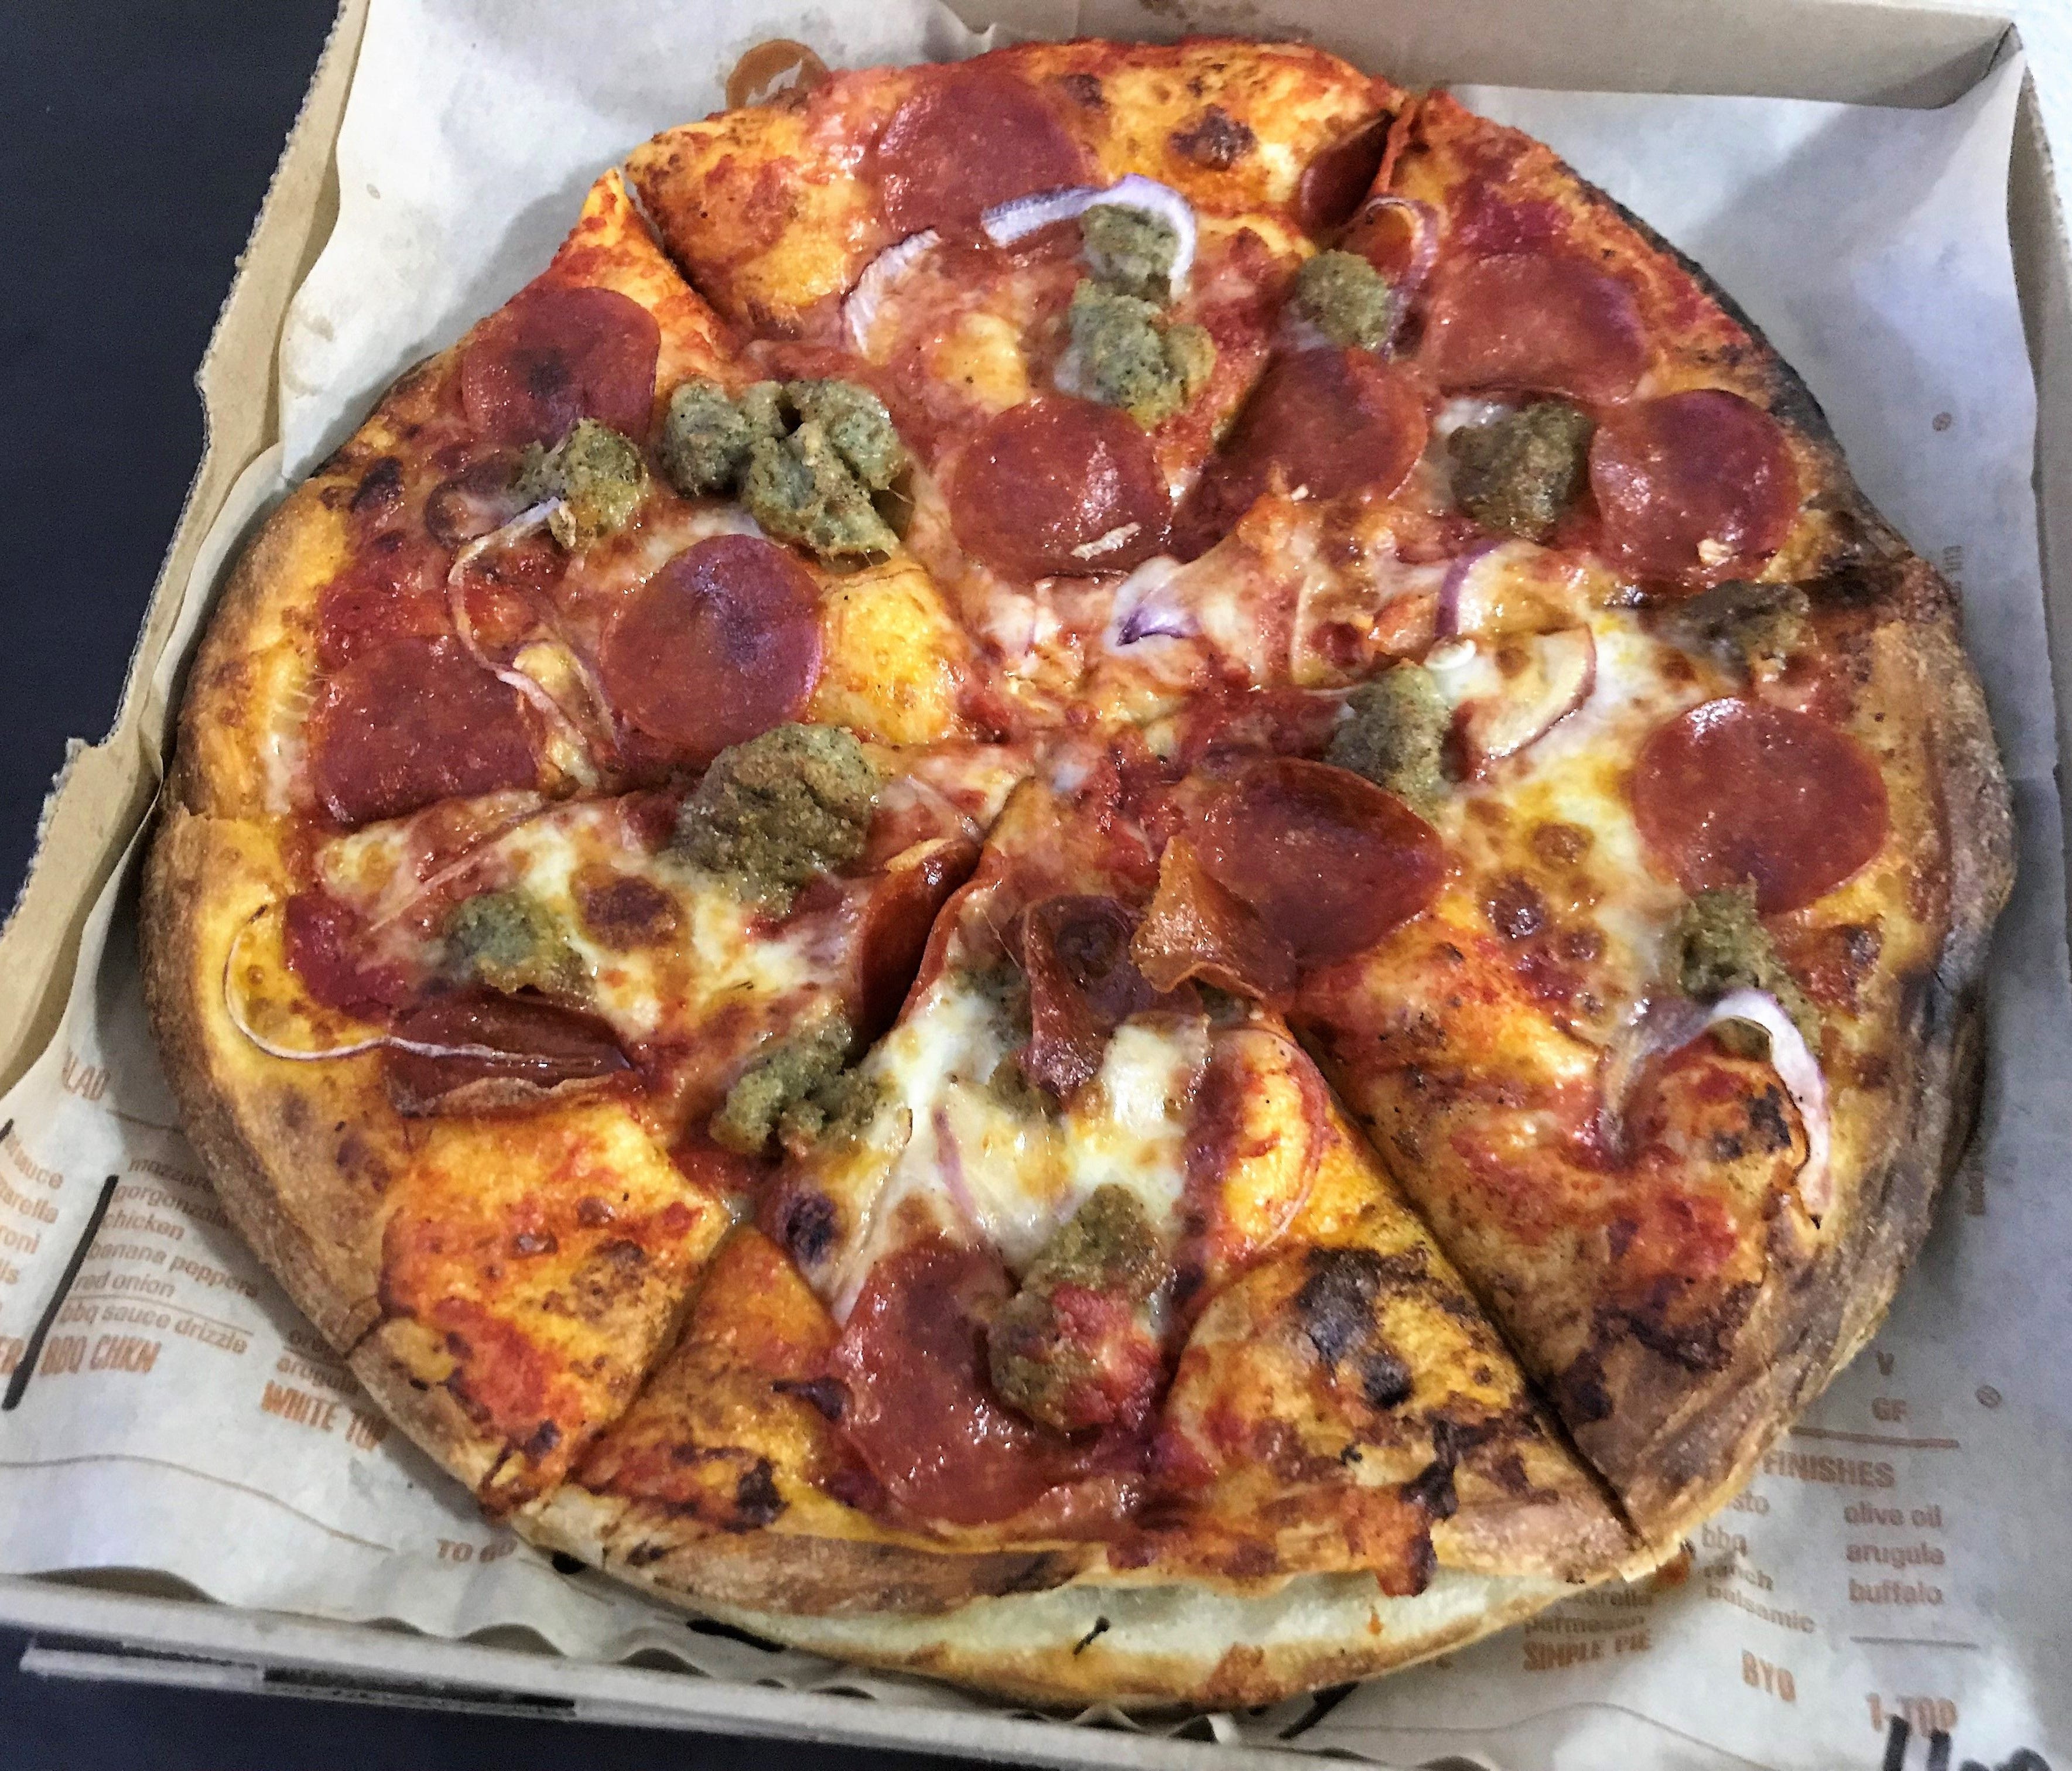 One of seven pre-designed signature pizzas at Blaze, the Meat Eater comes with pepperoni, crumbled meatballs, red onion, mozzarella and red sauce.